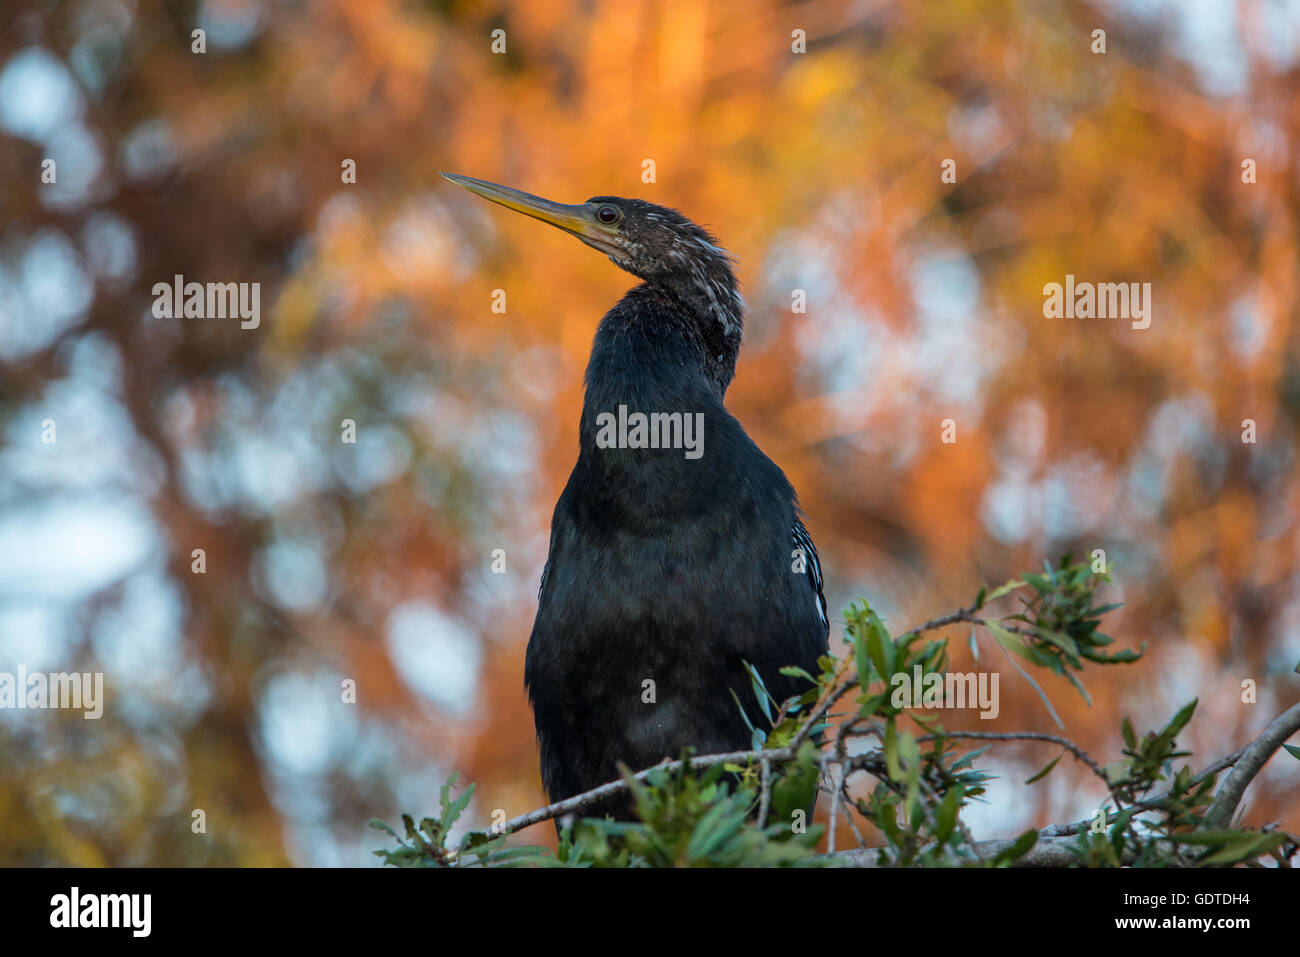 Anhinga bird pearched on branch Stock Photo